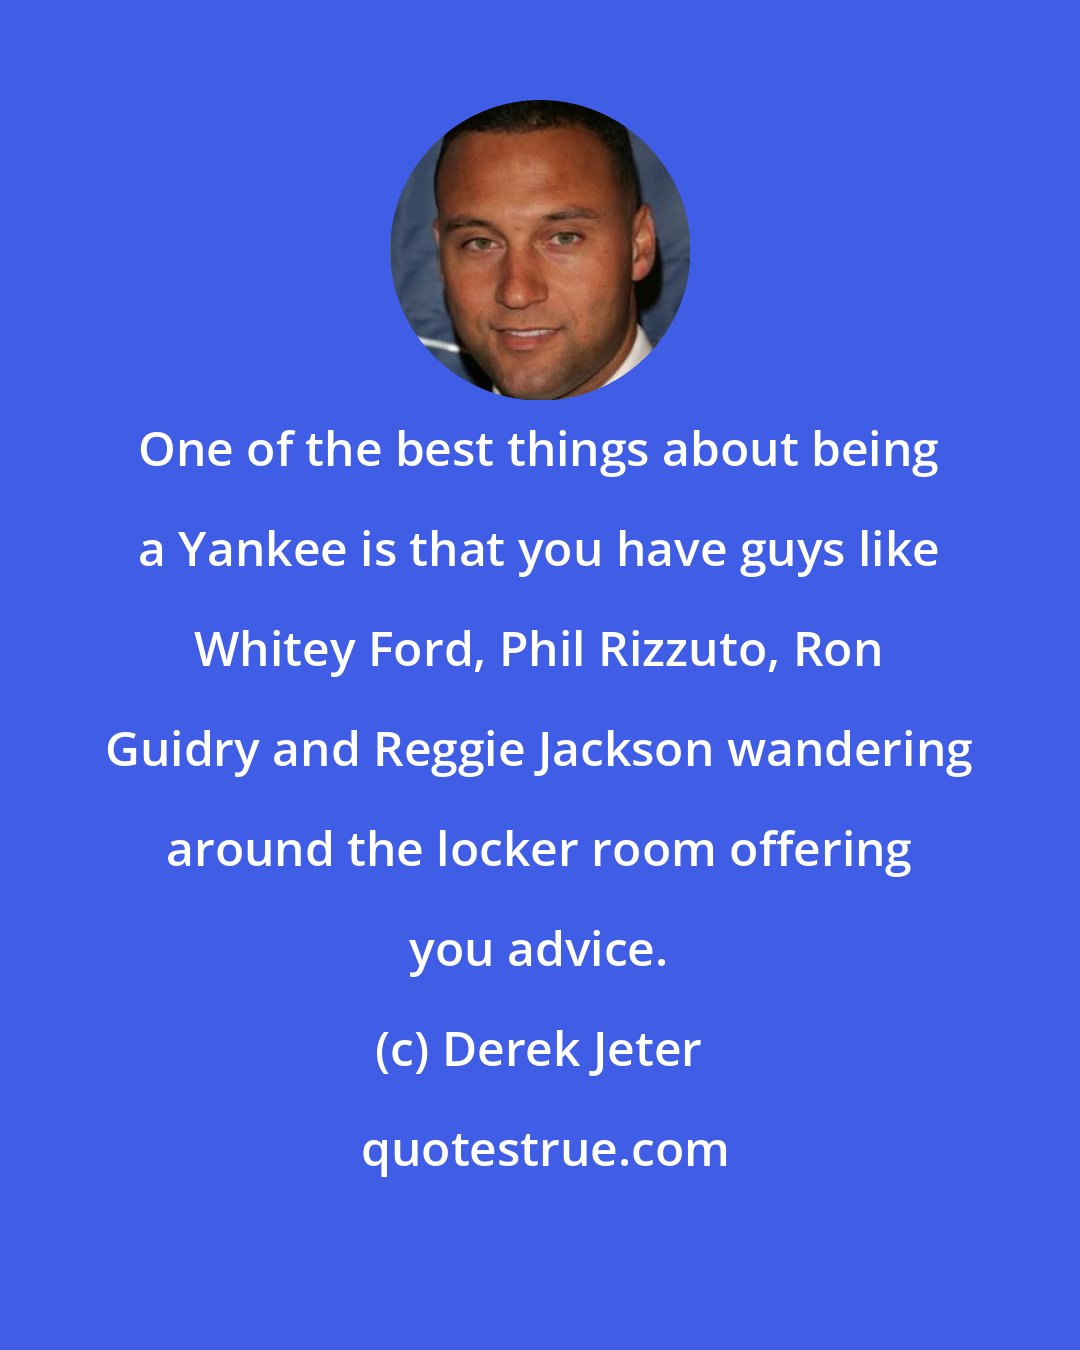 Derek Jeter: One of the best things about being a Yankee is that you have guys like Whitey Ford, Phil Rizzuto, Ron Guidry and Reggie Jackson wandering around the locker room offering you advice.